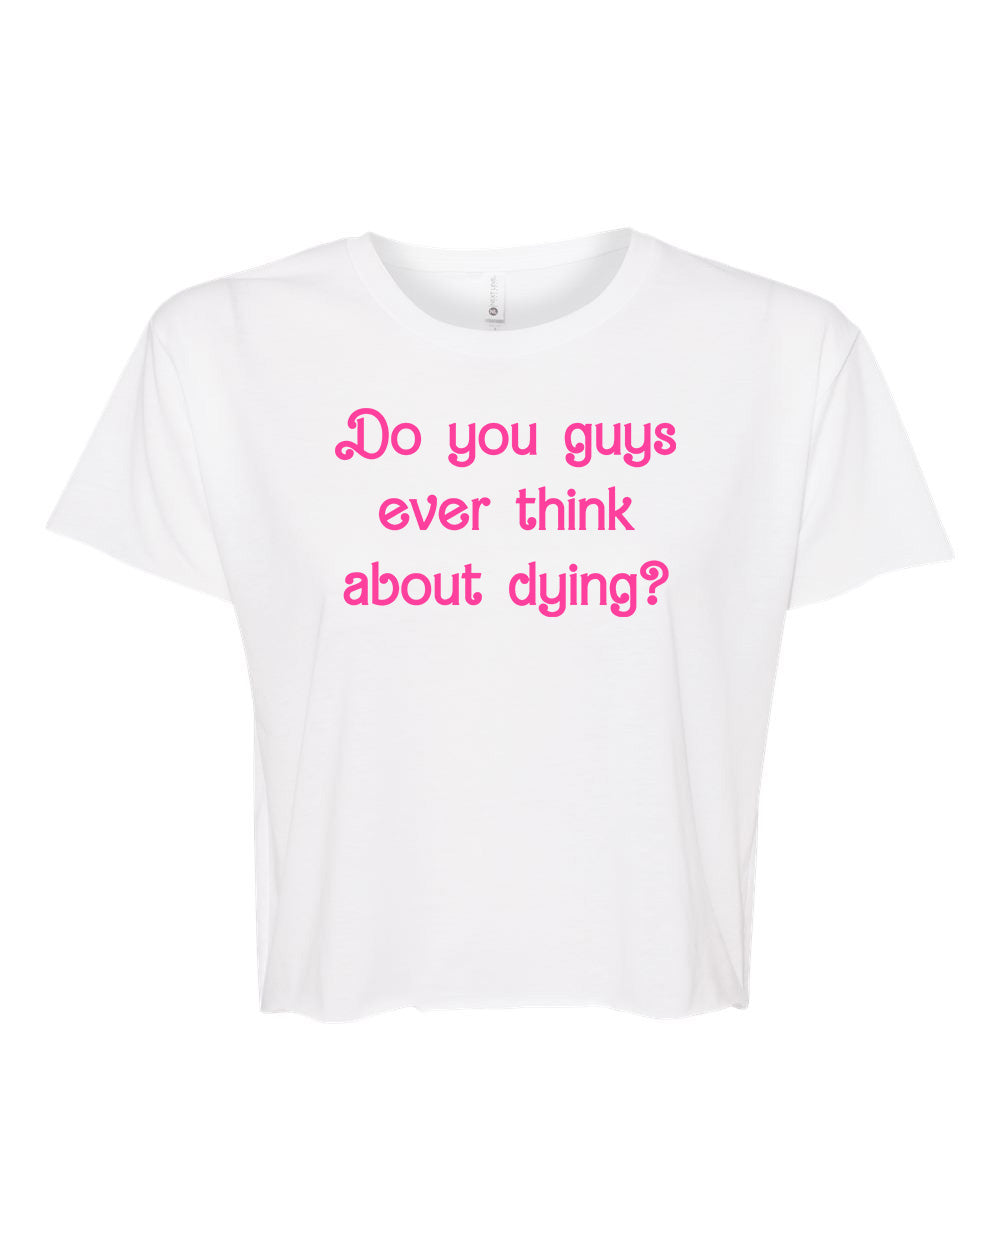 Do You Guys Ever Think About Dying? - Women's Crop Tee - White with Pink Ink